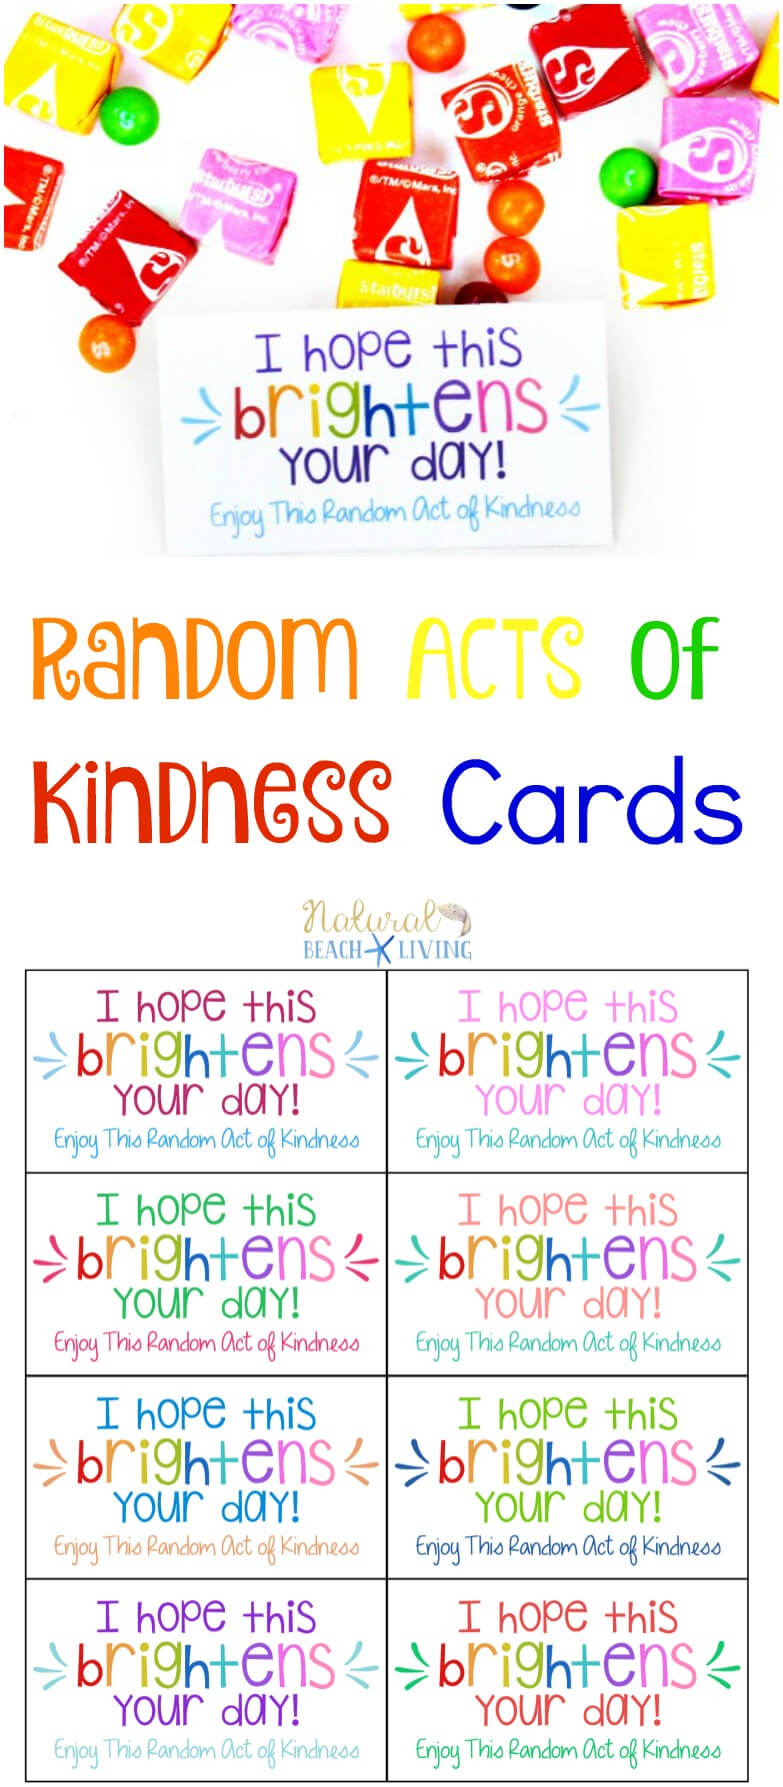 random-acts-of-kindness-cards-kindness-notes-gifts-cards-pertaining